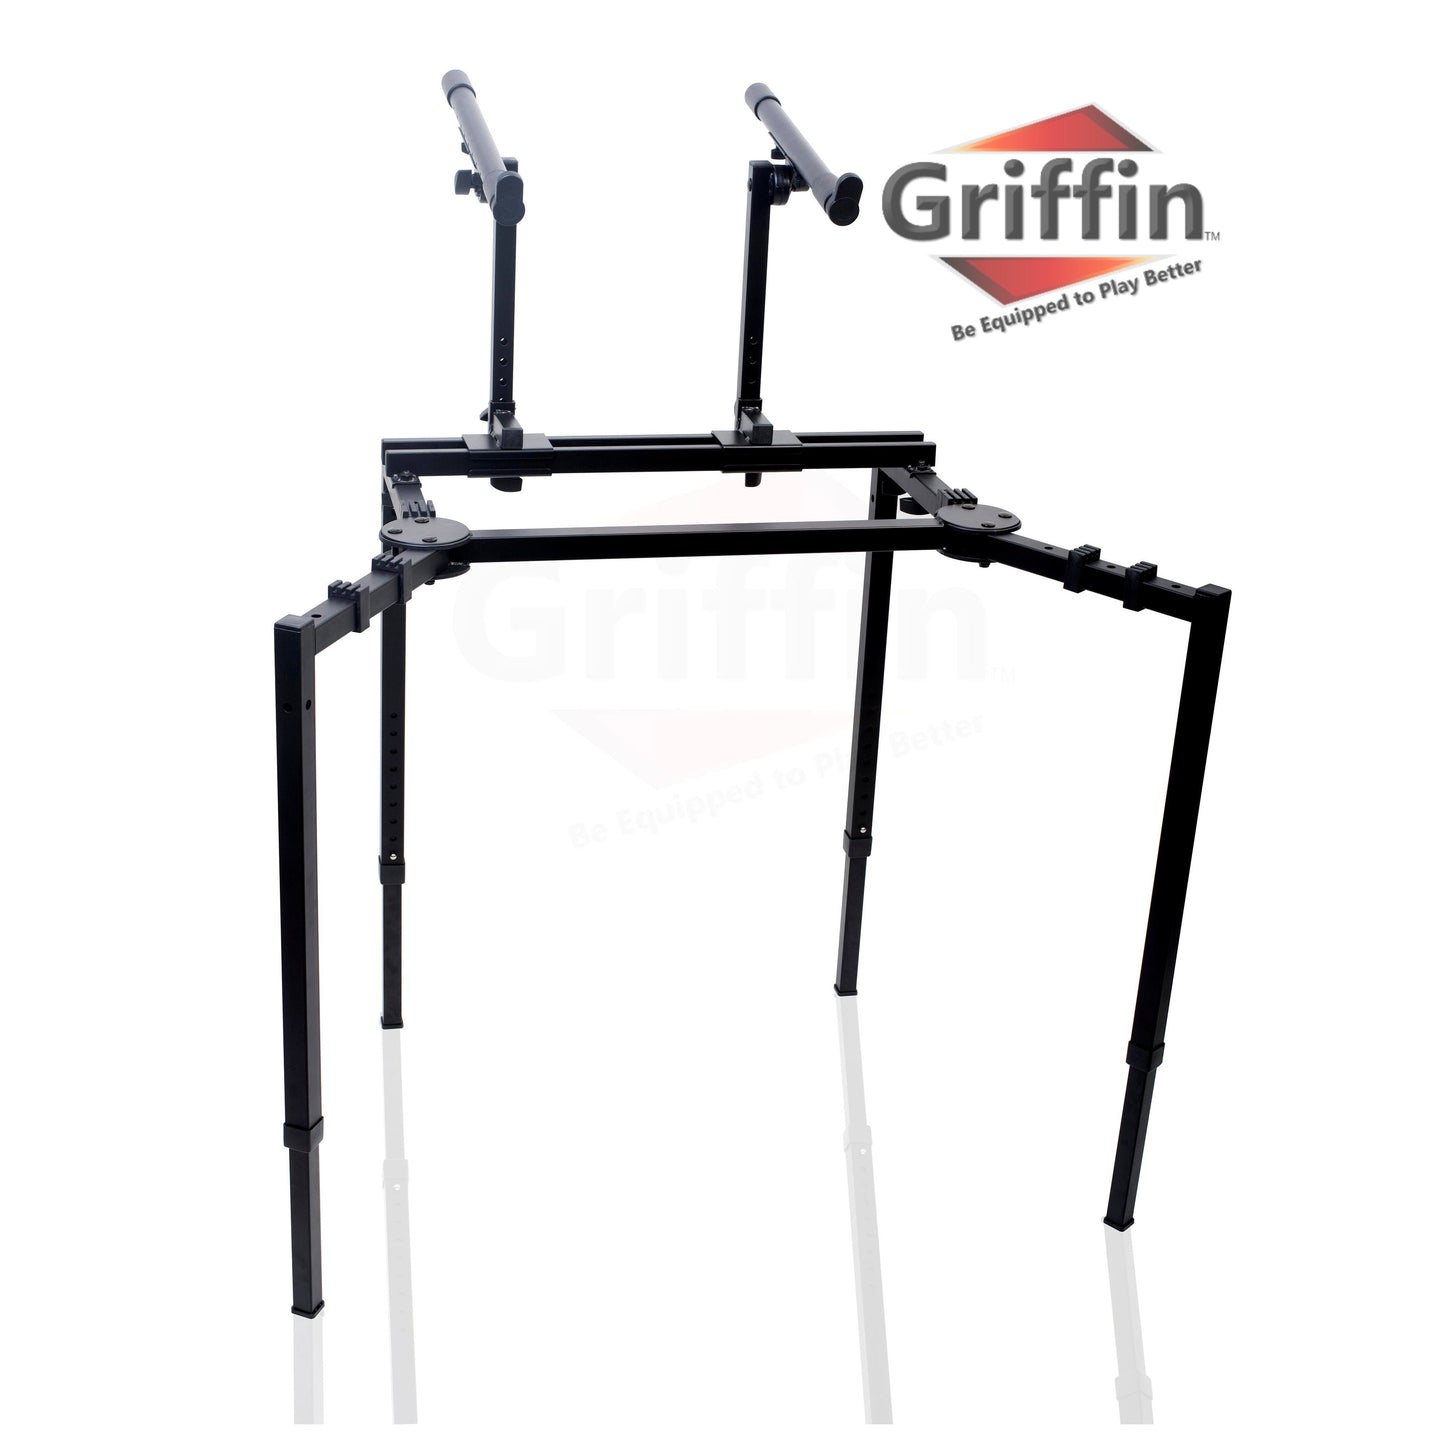 Double Piano Keyboard & Laptop Stand by GRIFFIN - 2 Tier/Dual Portable Studio Mixer Rack for Turntables, DJ Coffins, Speakers, Digital Music Gear